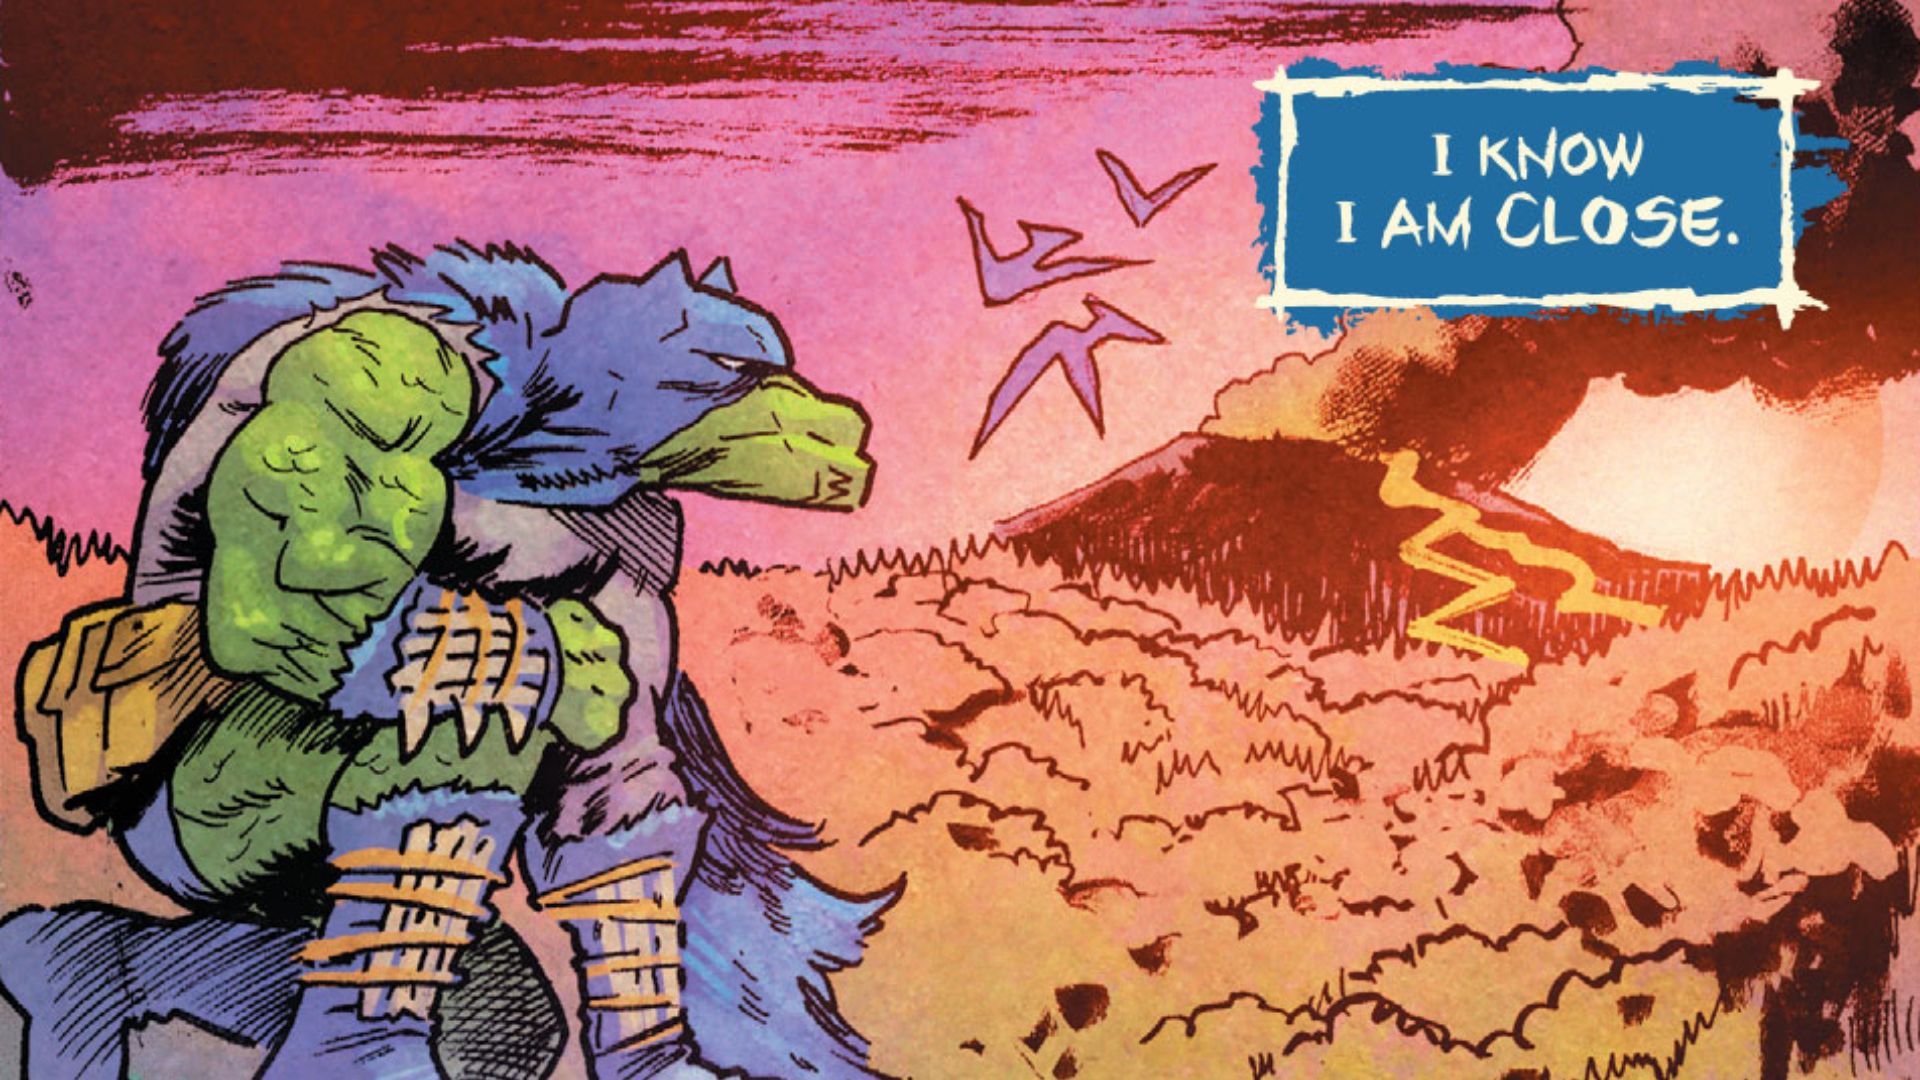 The Jurassic League #1 first impressions: “A book that will make you smile”